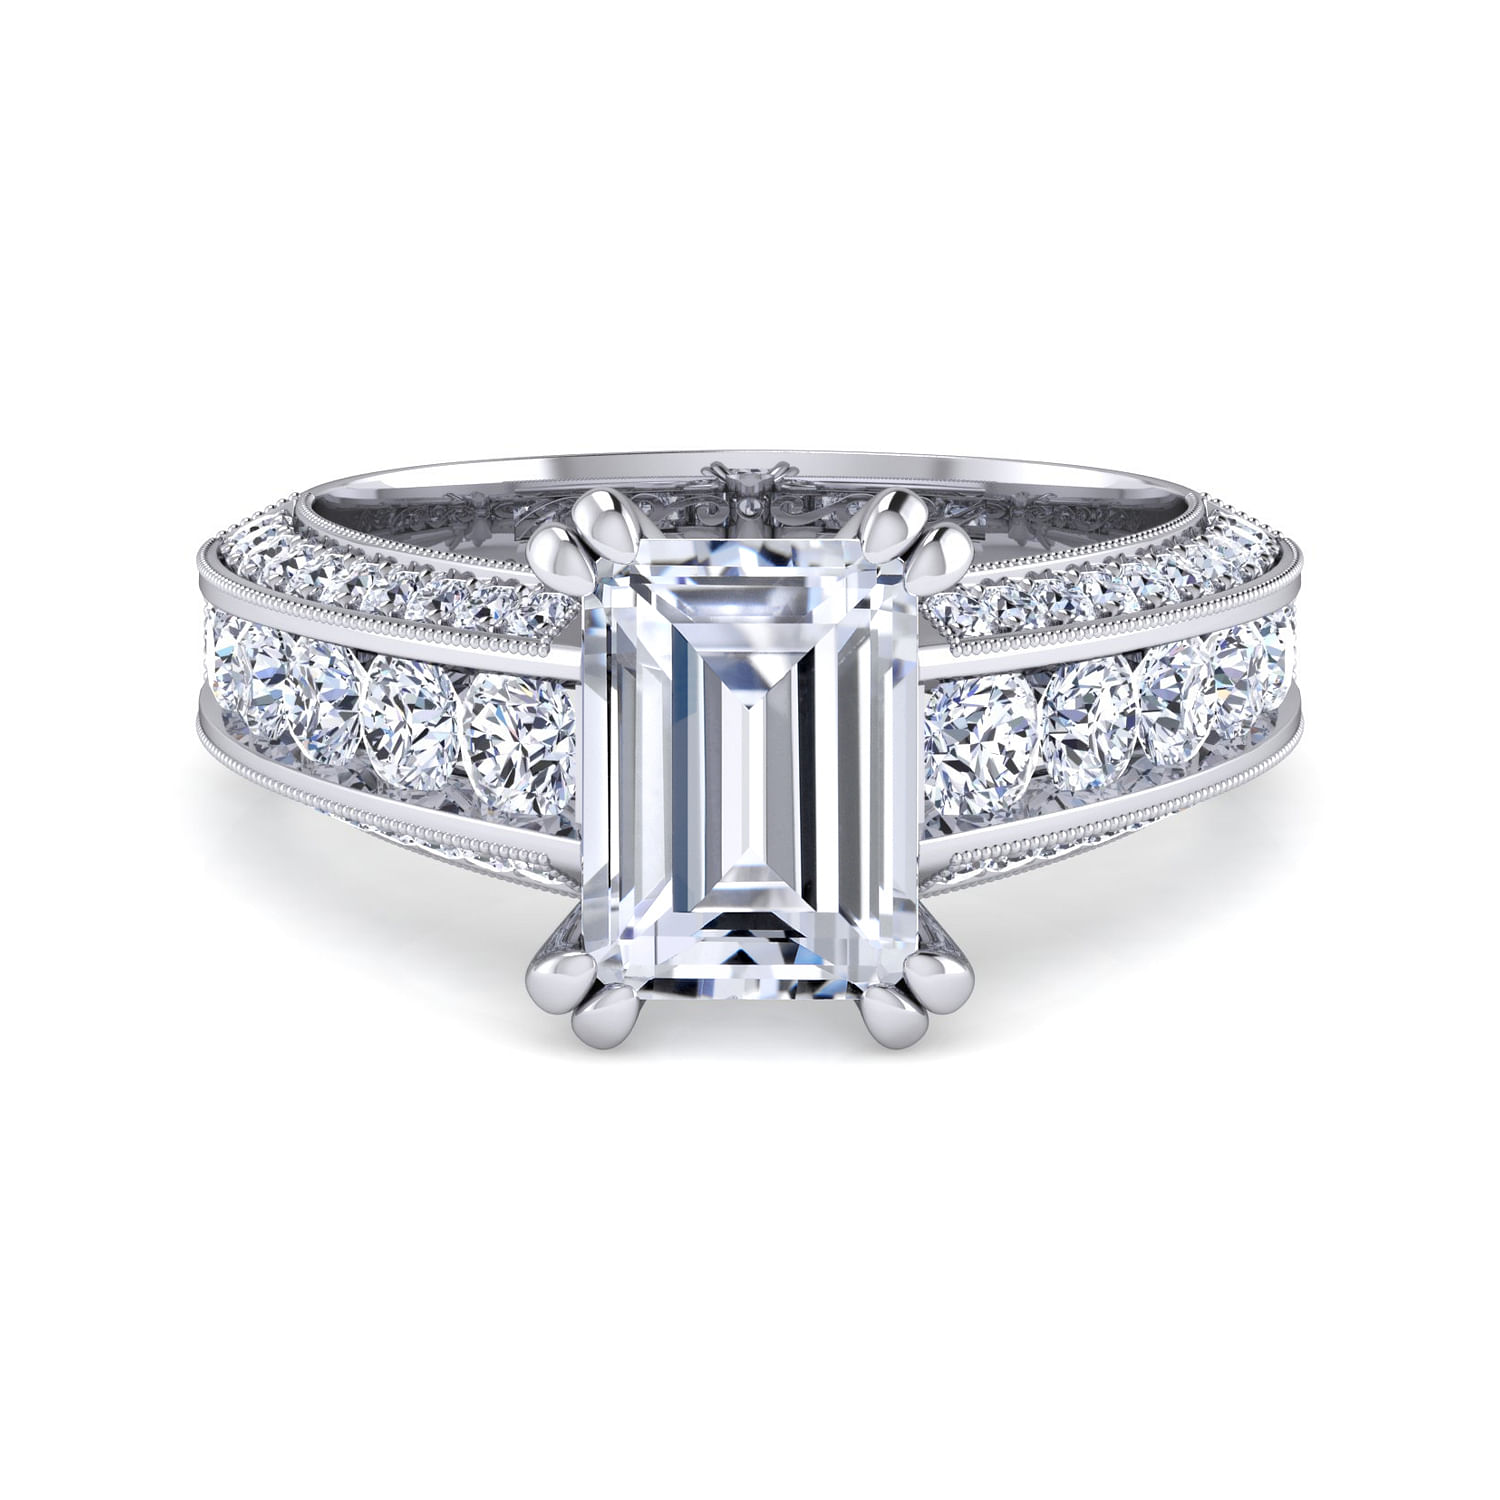 Rebecca - Vintage Inspired 14K White Gold Emerald Cut Wide Band Diamond Engagement Ring